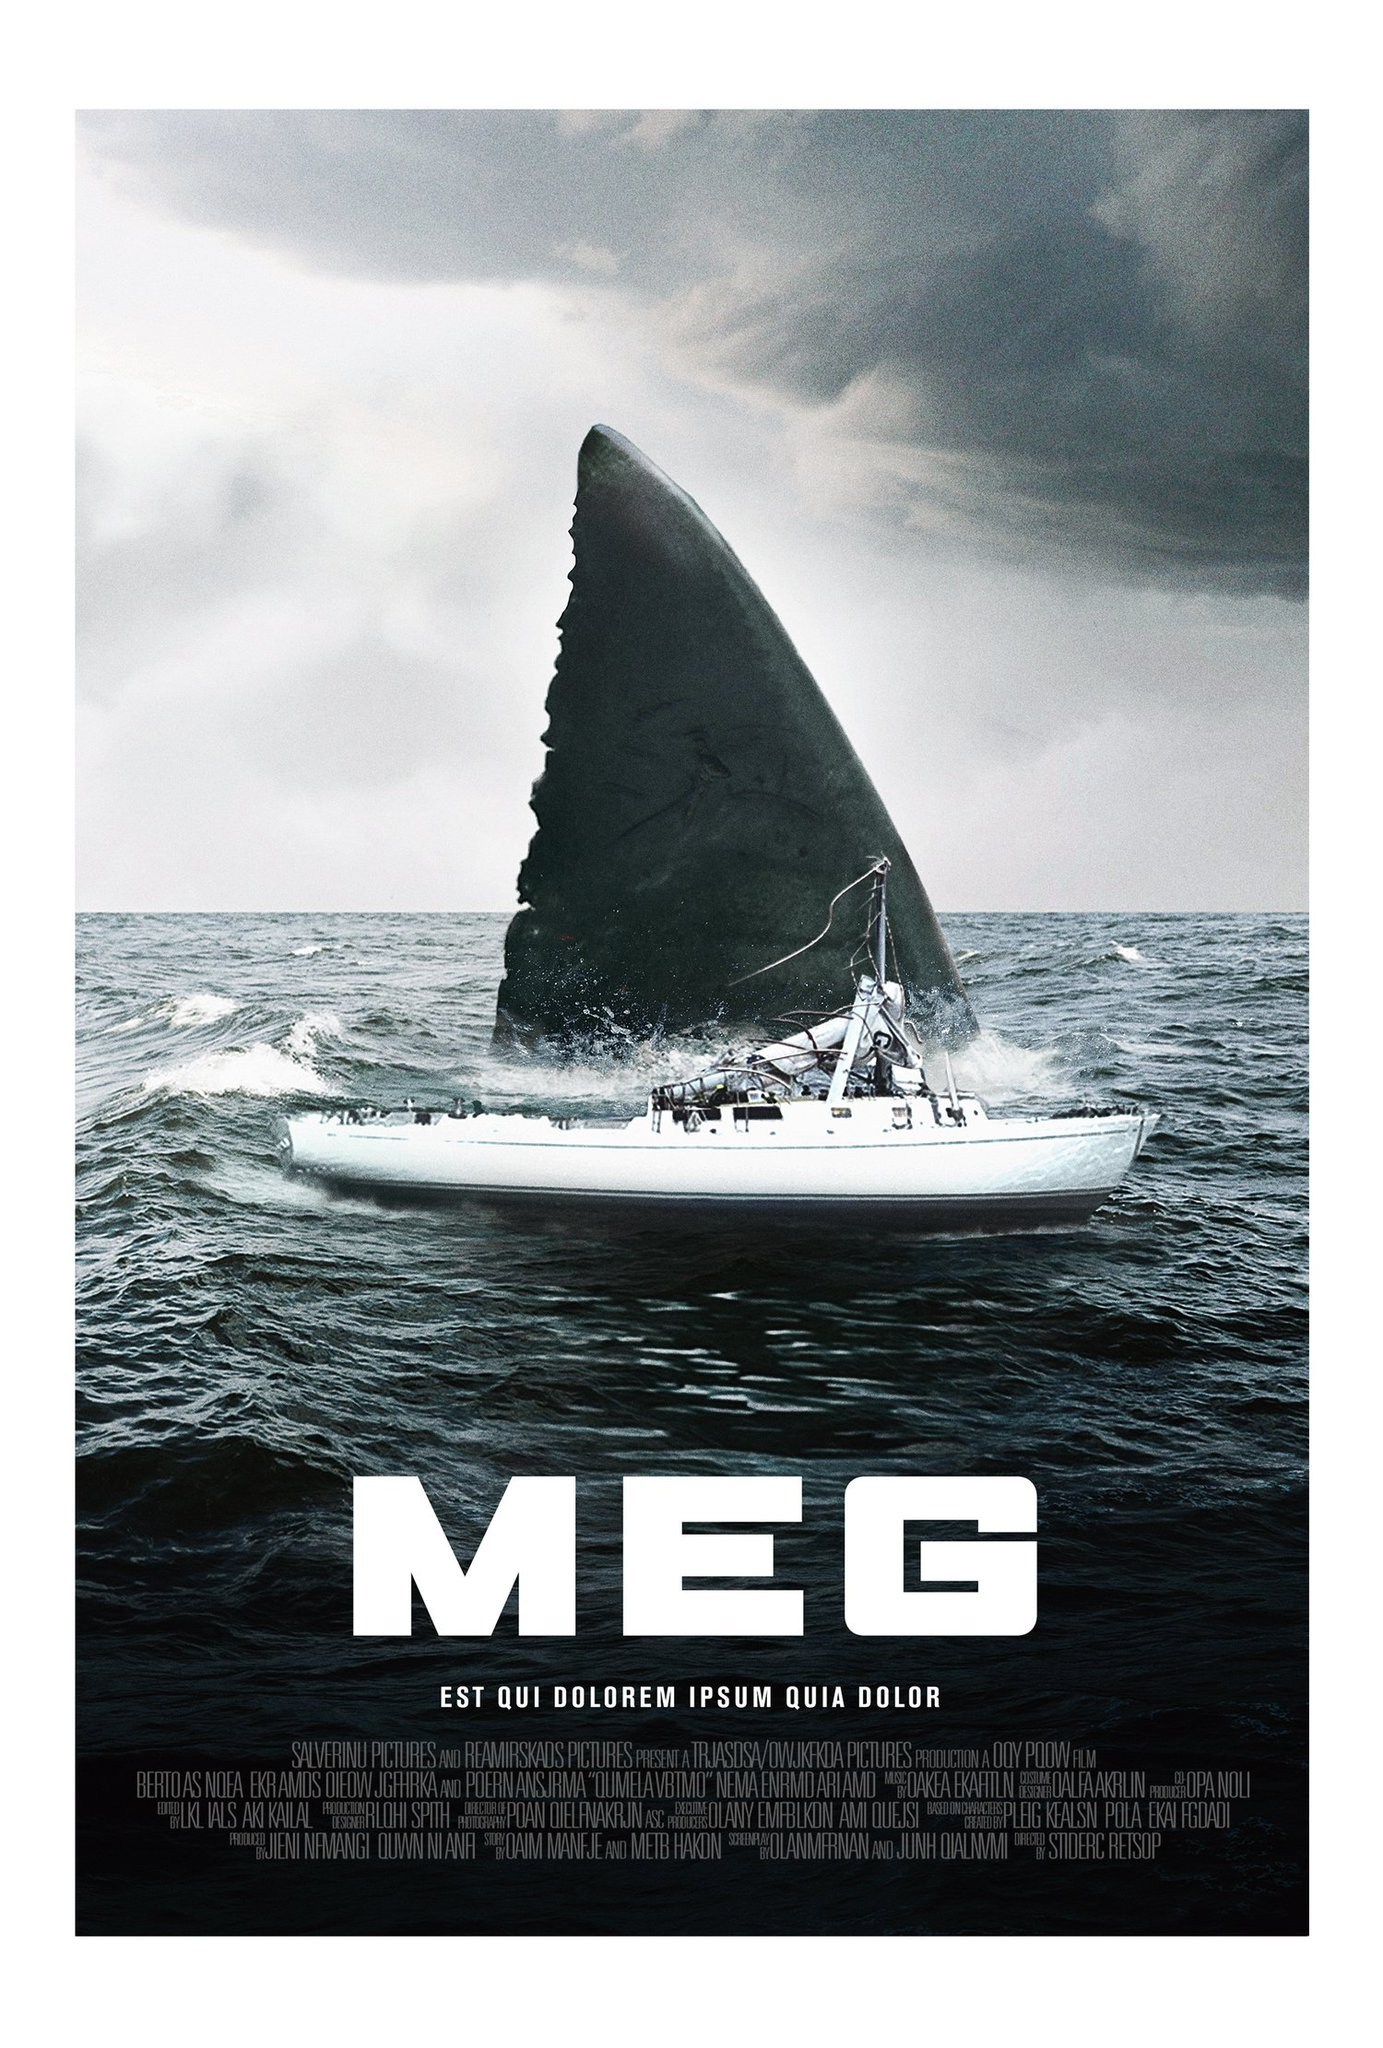 Artist S Awesome Meg Posters Have Made Us Even Hungrier